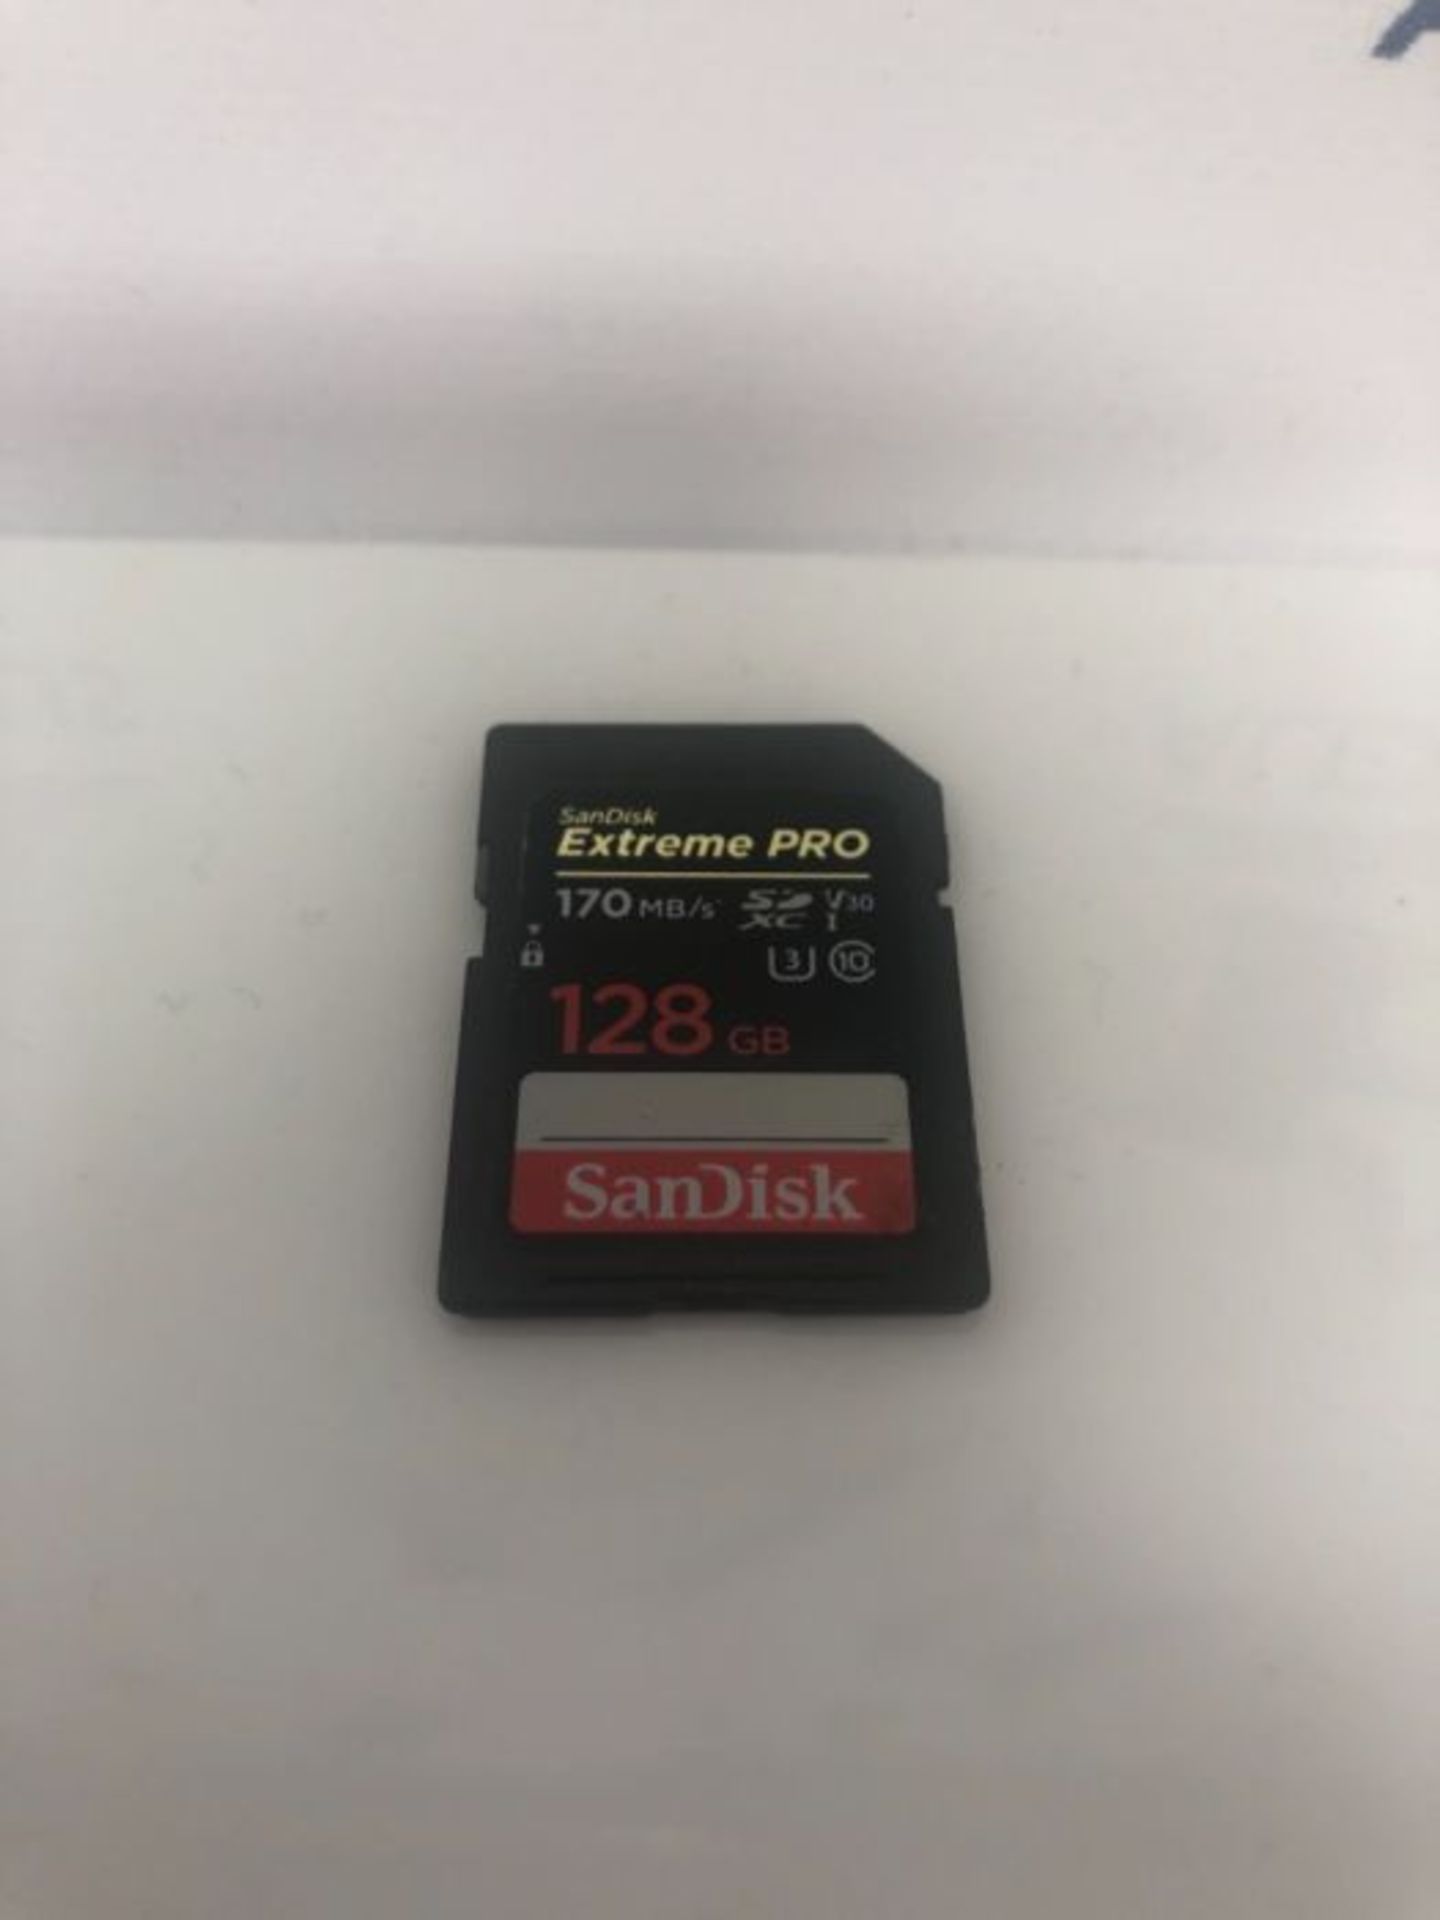 SanDisk Extreme PRO 128GB SDXC Memory Card up to 170MB/s, UHS-1, Class 10, U3, V30 - Image 2 of 2